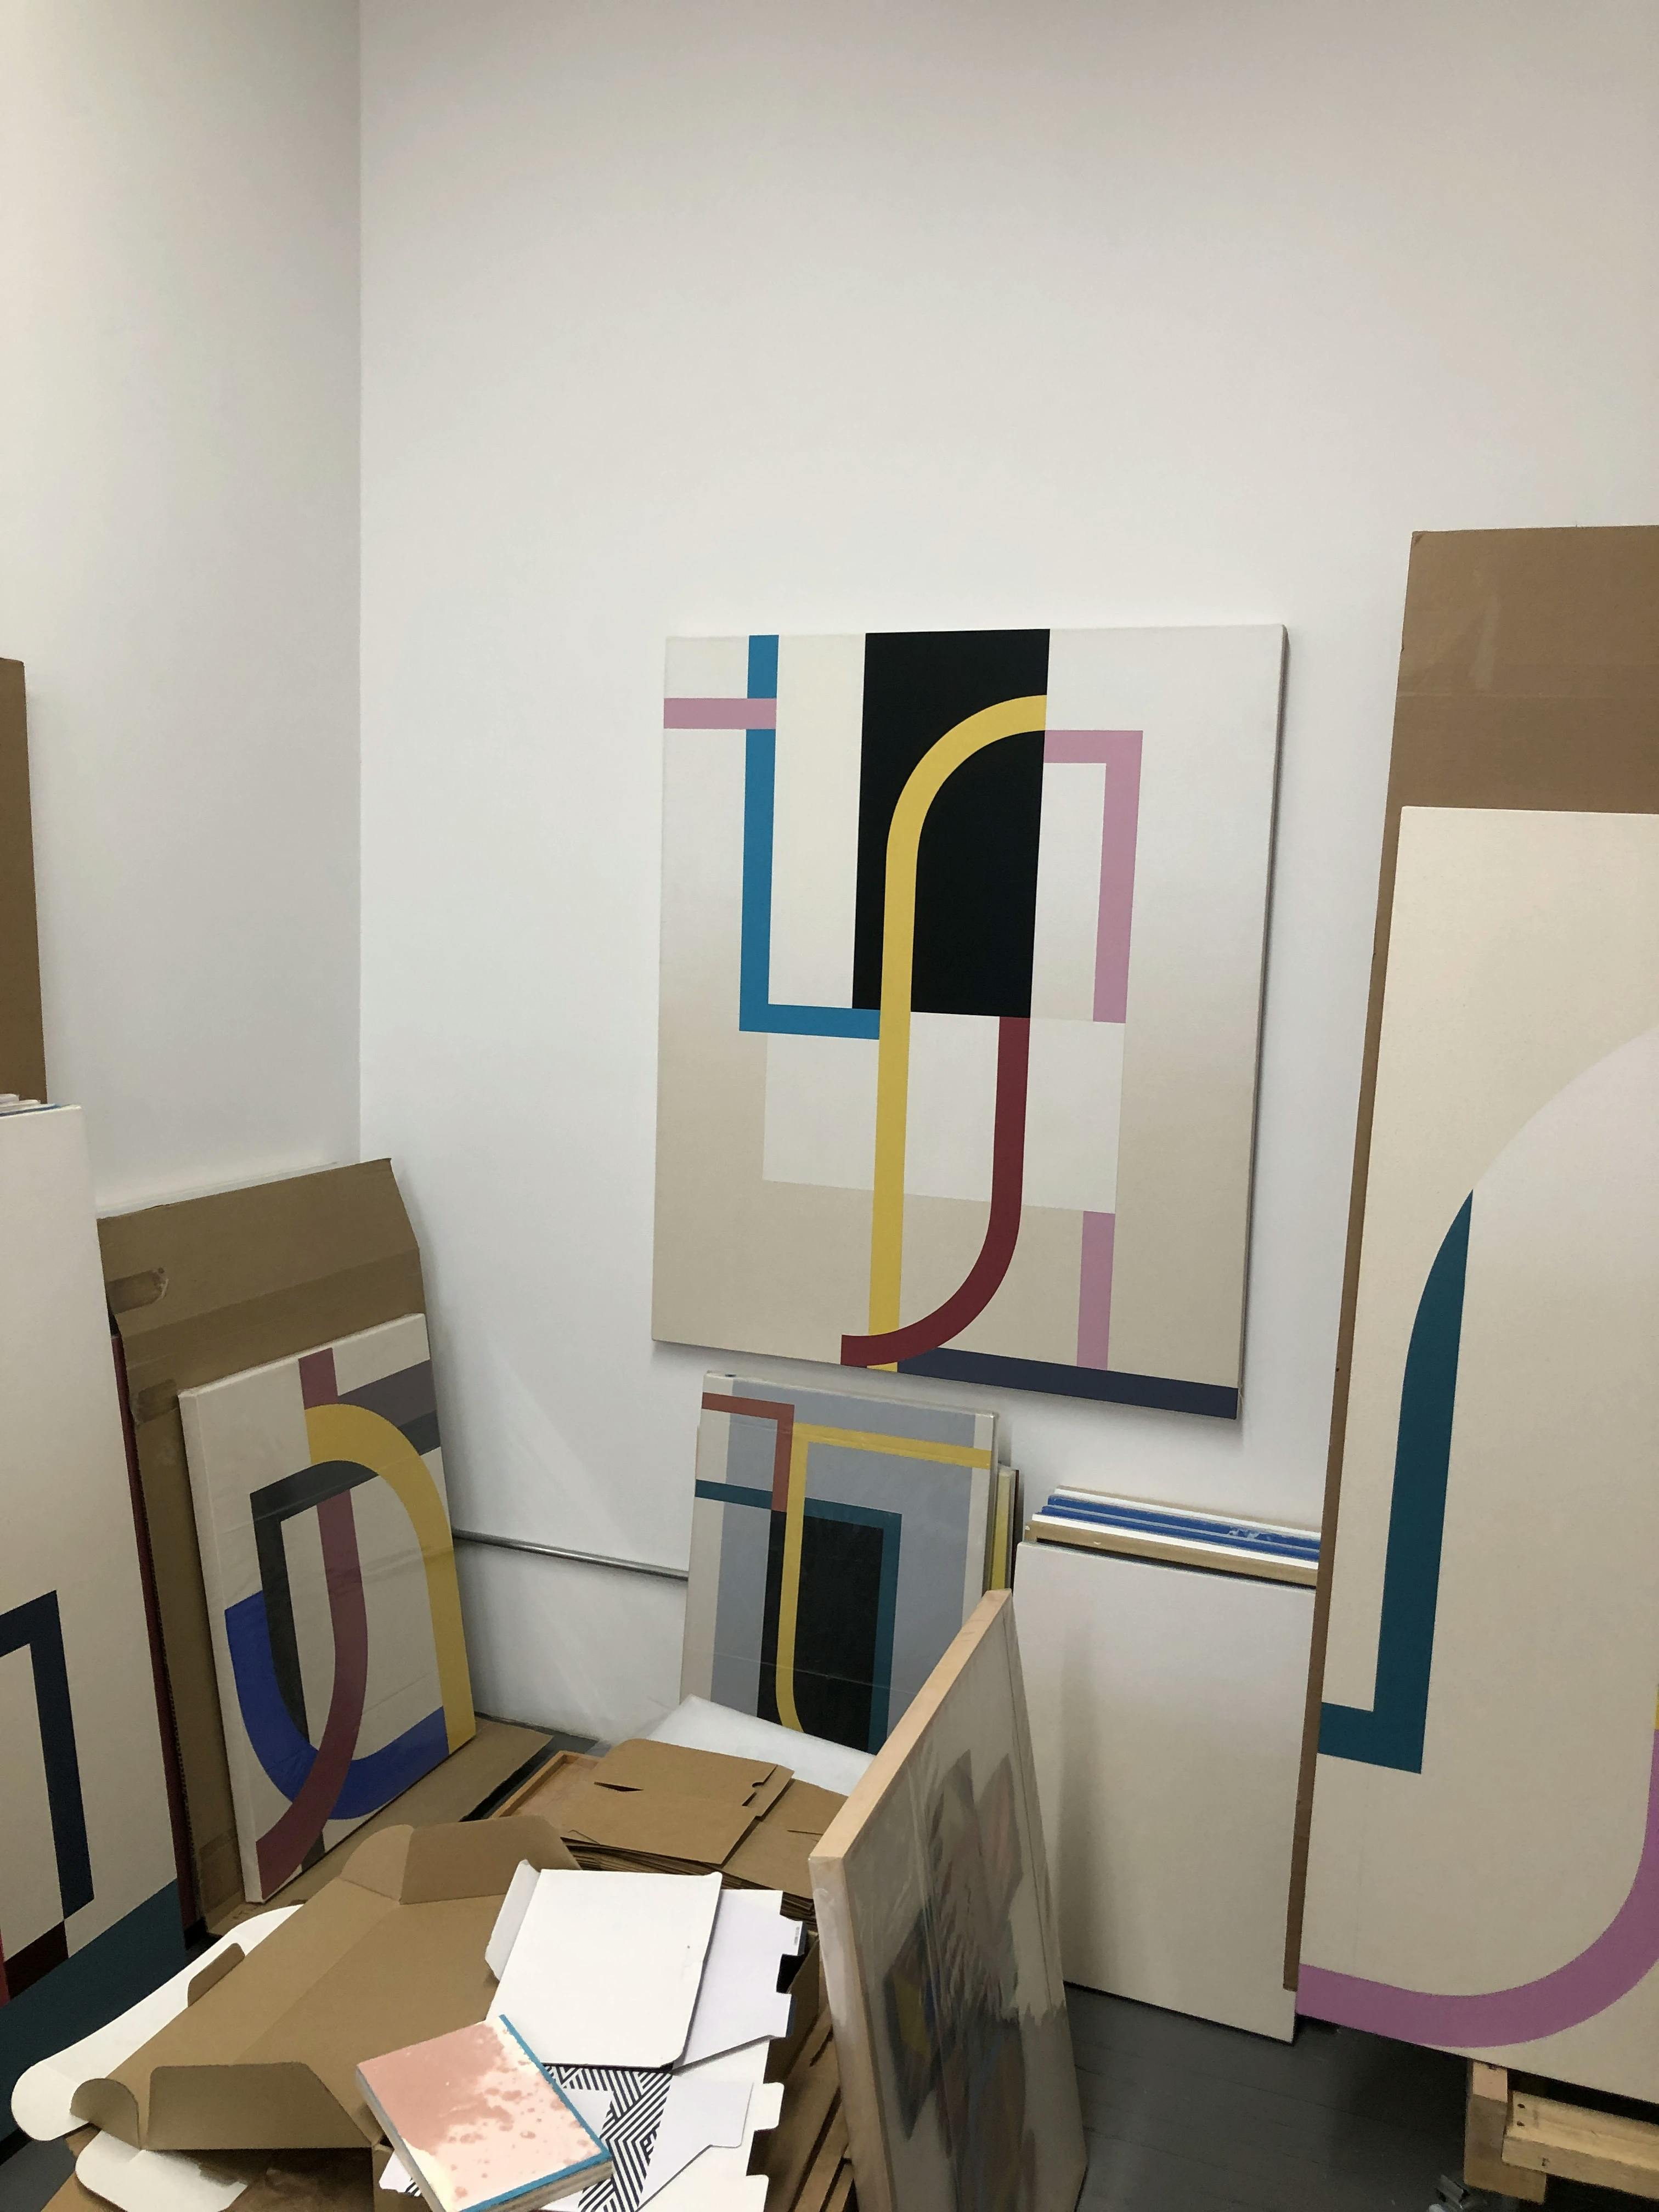 Multiple abstract, geometric paintings by artist Christian Nguyen installed and propped up against the wall in his studo.